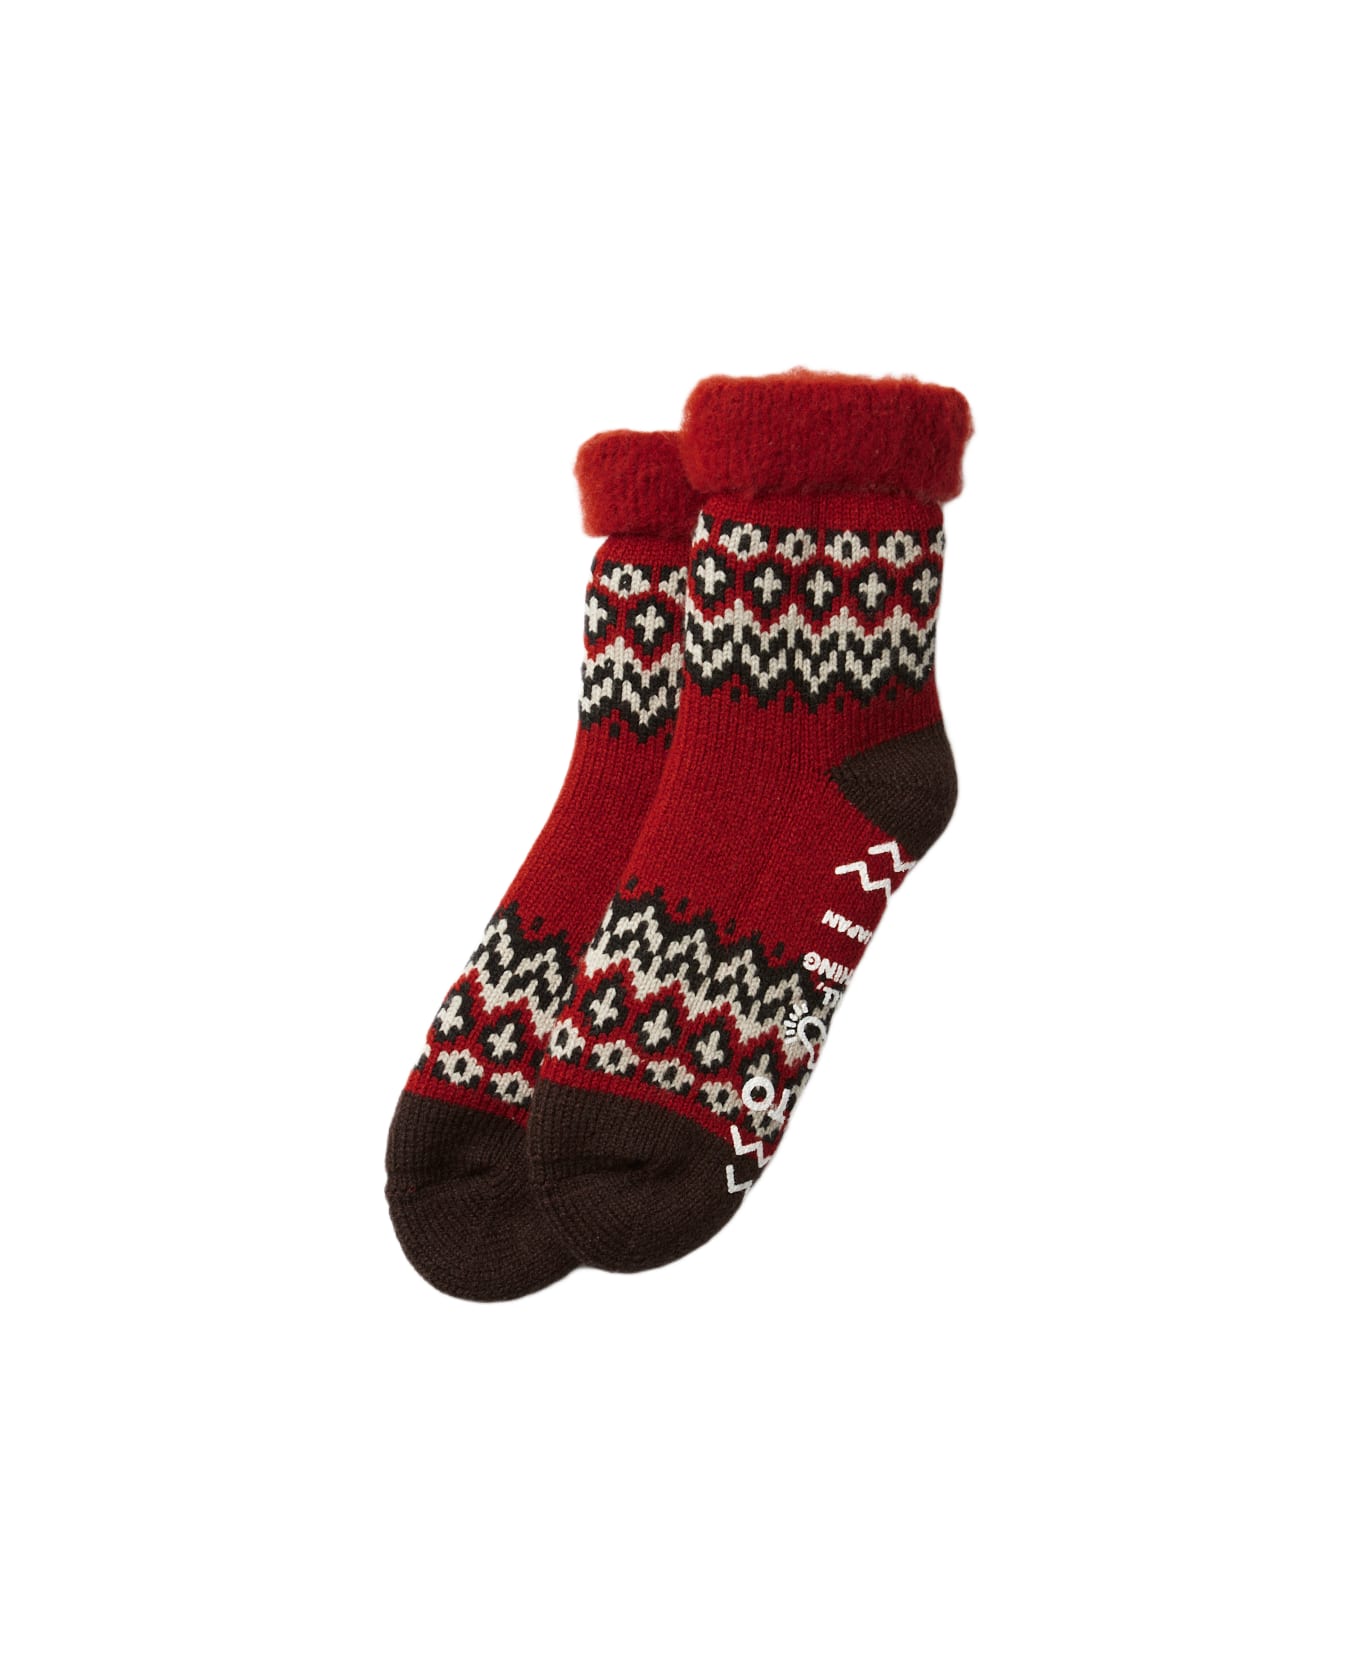 Rototo Comfy Room Socks Nordic - Red